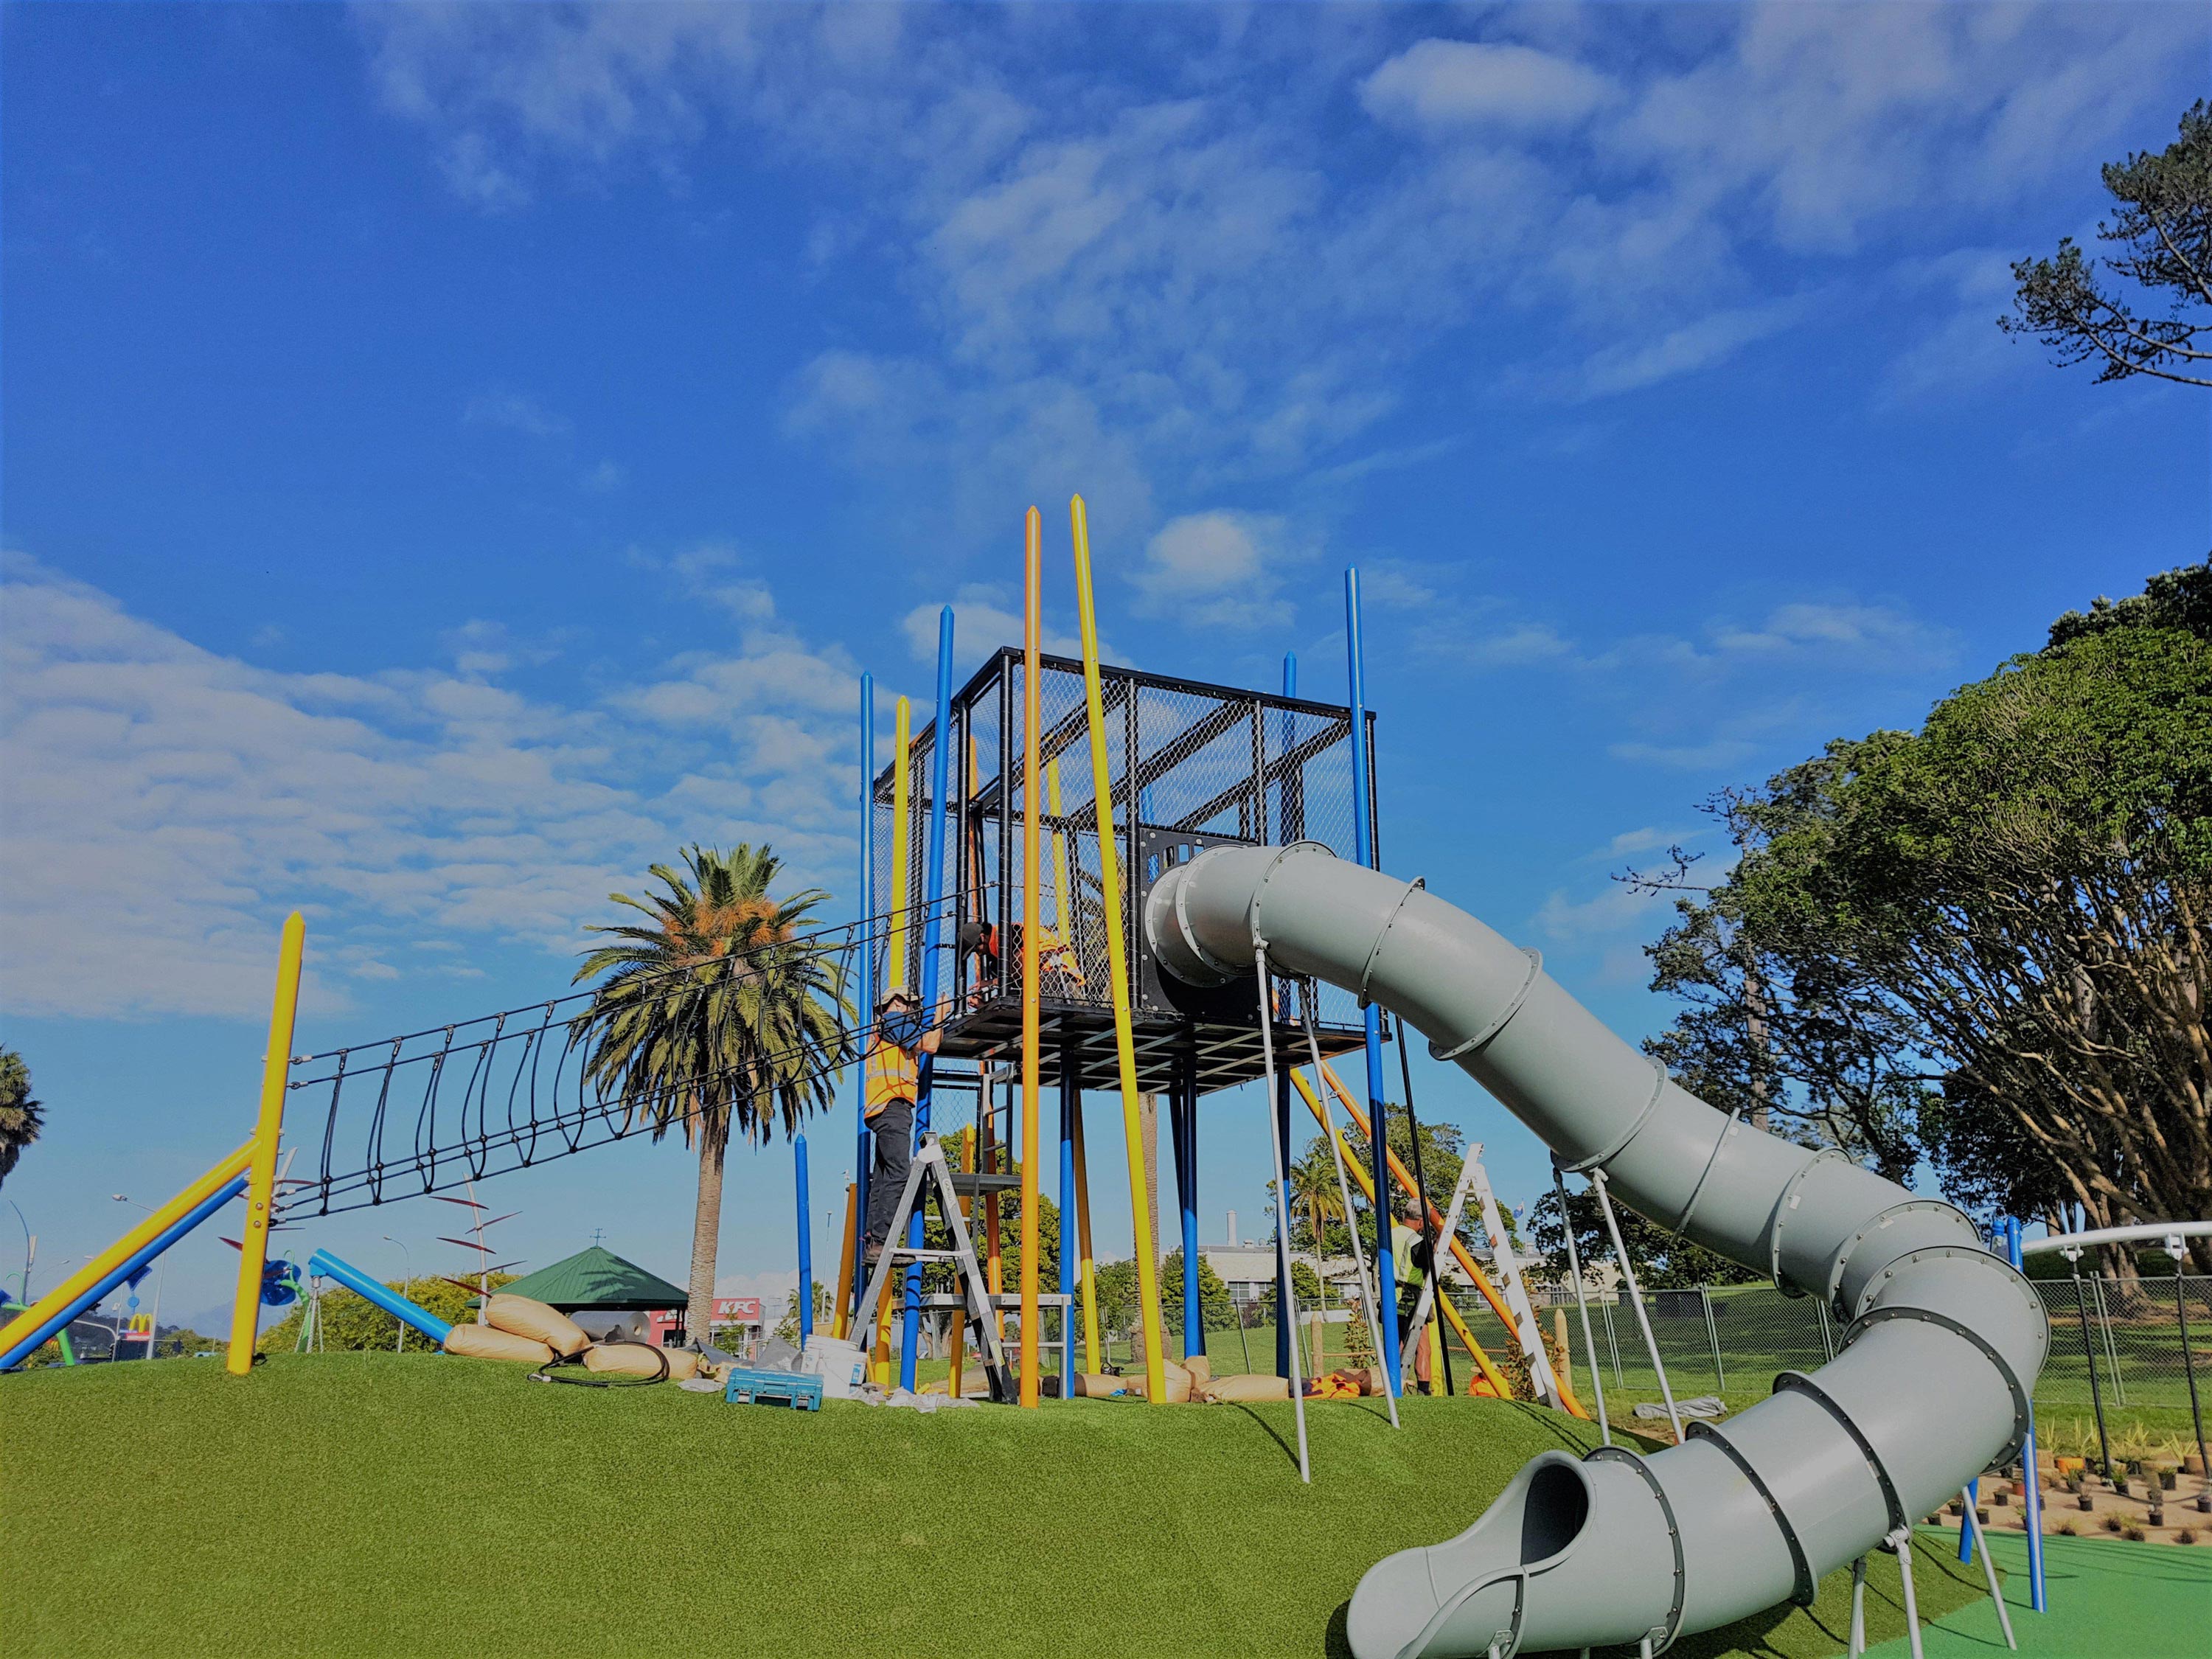 How playground safety has improved in recent years